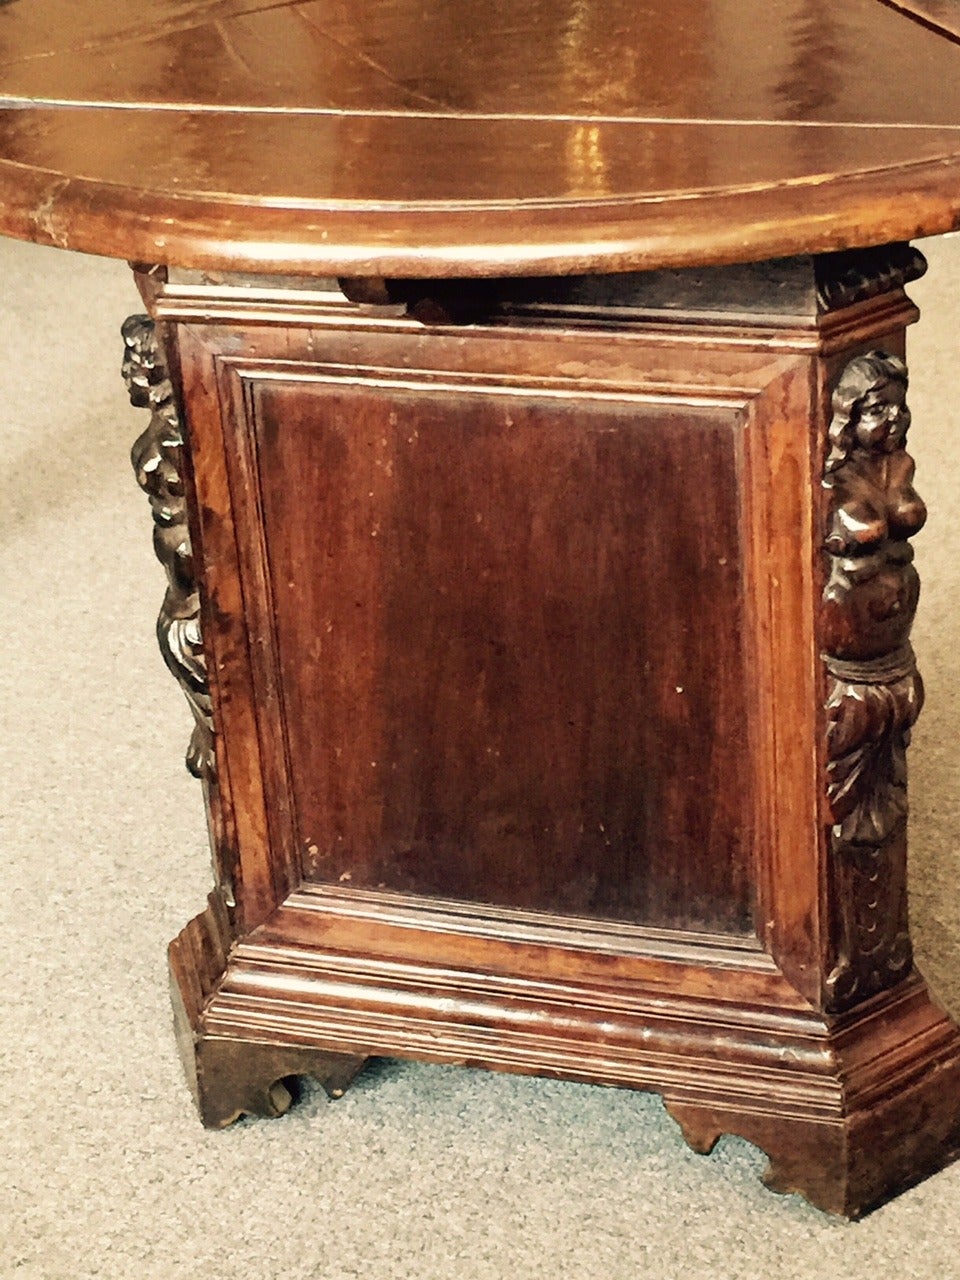 Interesting Italian walnut side table on a triangular stepped base. The three corners of the triangle are decorated with a carved figure of a woman in the classical style. A door in the base opens to allow storage with one shelf. The top is circular